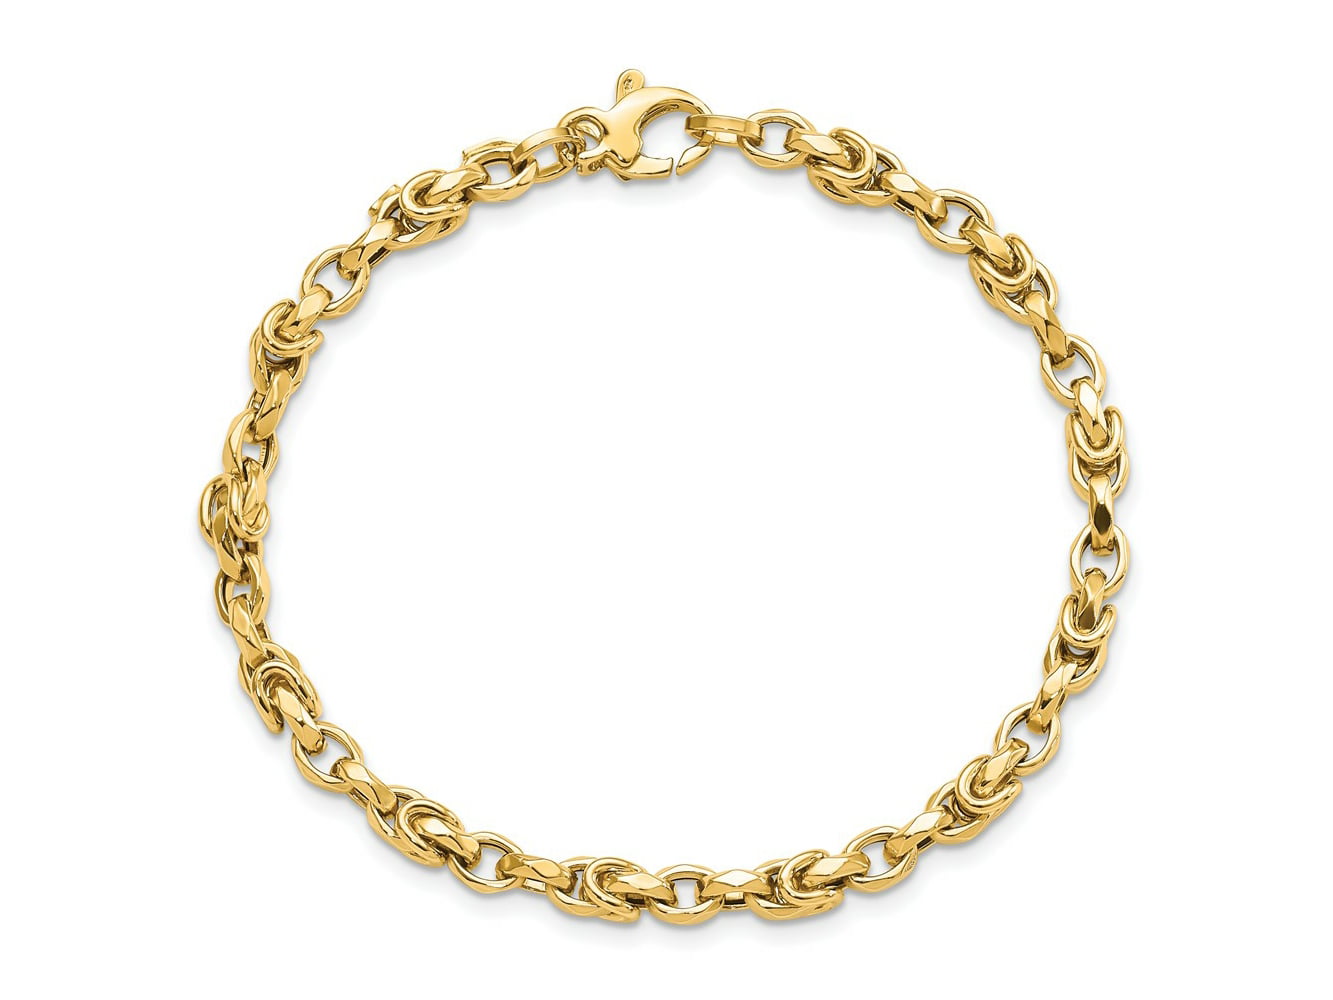 14k Yellow Gold Large Oval Link Bracelet w/ Florentine Finish Alternating  with 3 Vertical Gold Ball Links – G114